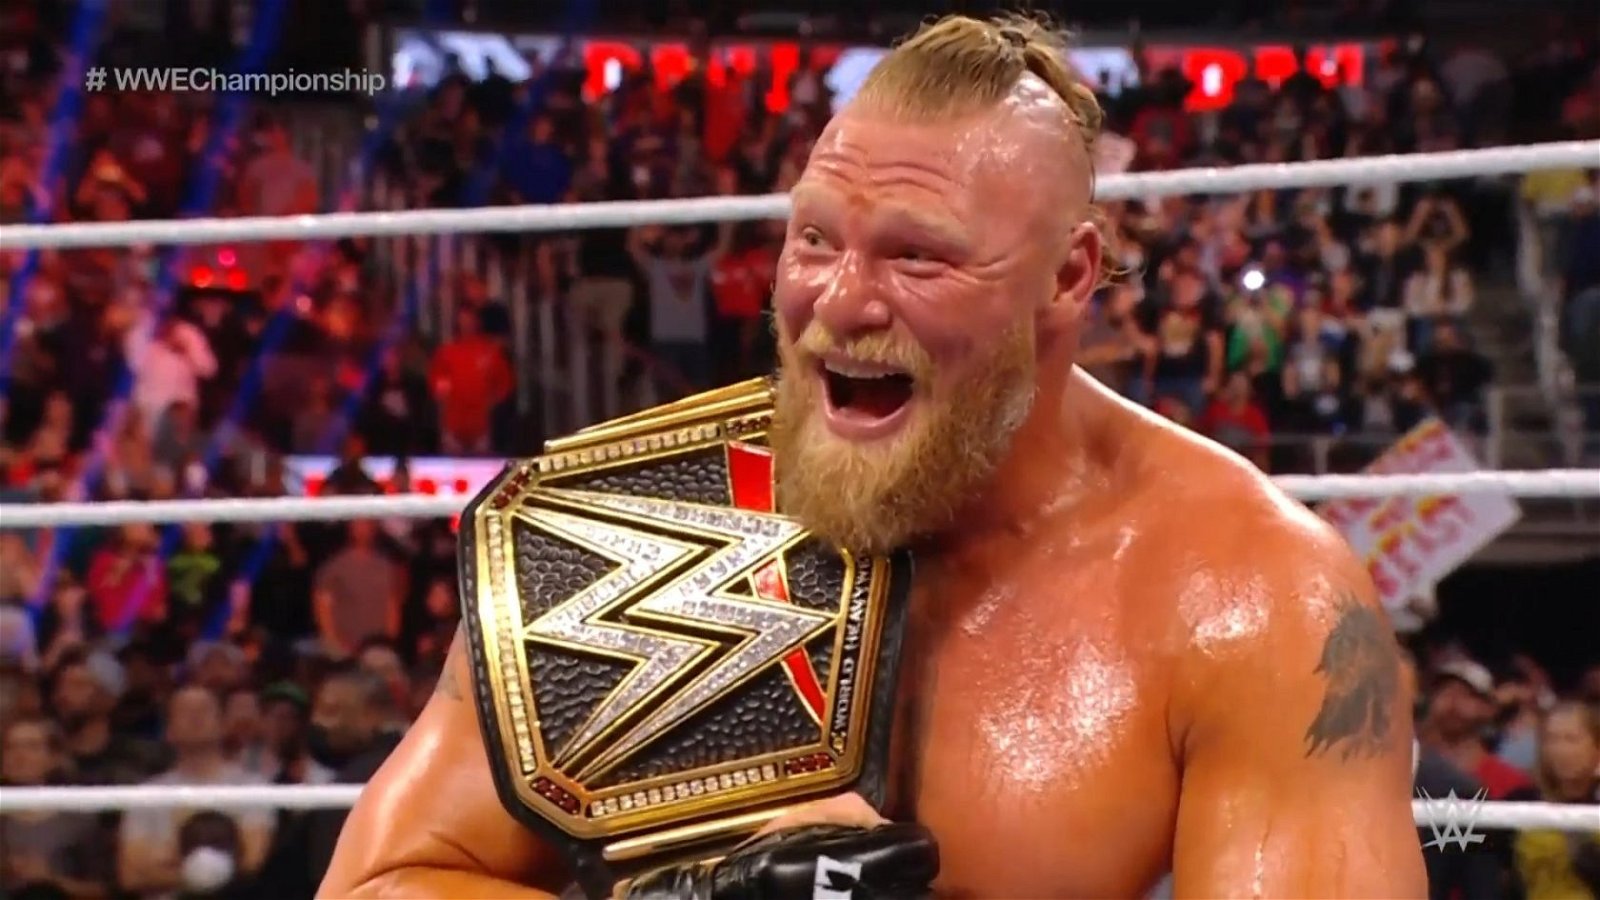 Brock Lesnar Breaks Impressive Record With WWE Championship Win